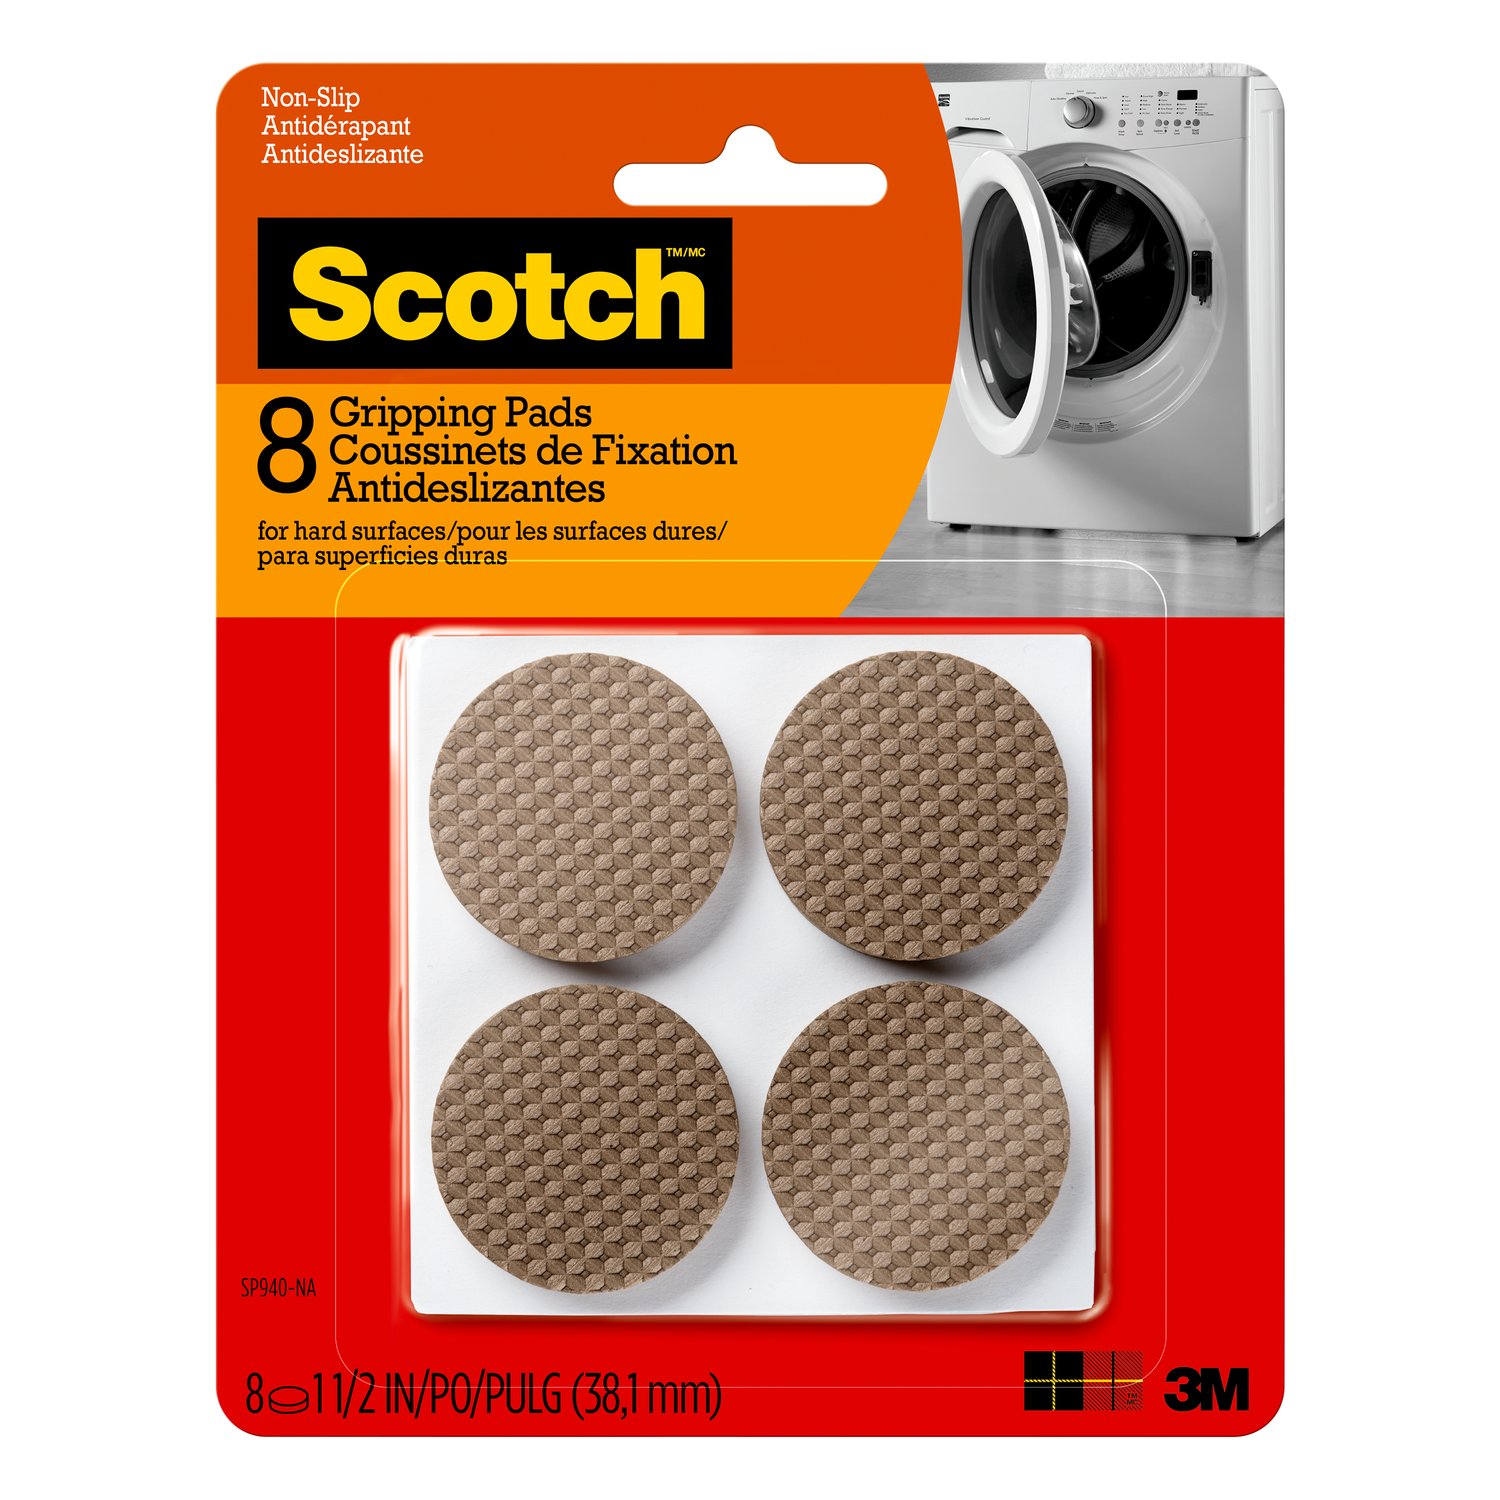 7100112866 - Scotch Gripping Pads, SP940-NA, Brown, 1 1/2 inch